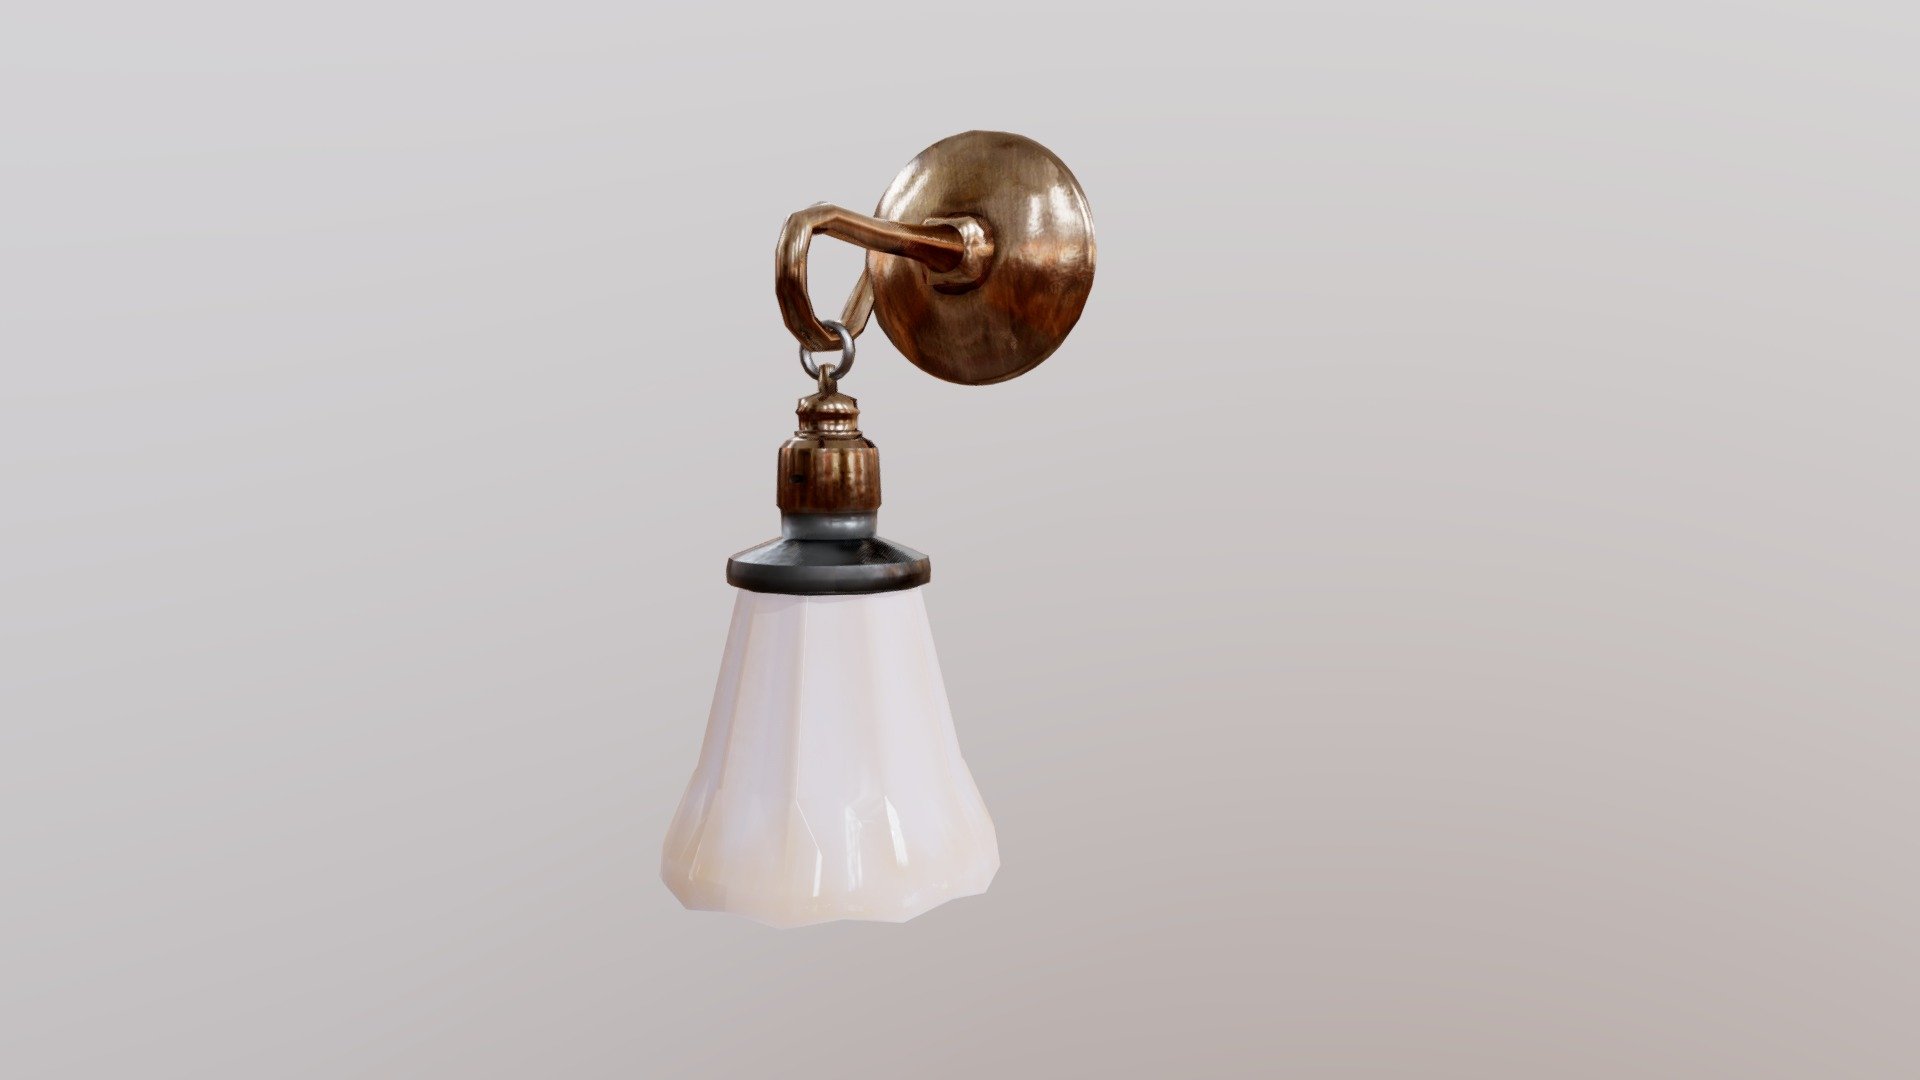 made with Maya and Substance Painter 2020 - 1910's Wall Lamp - 3D model by endim8 3d model